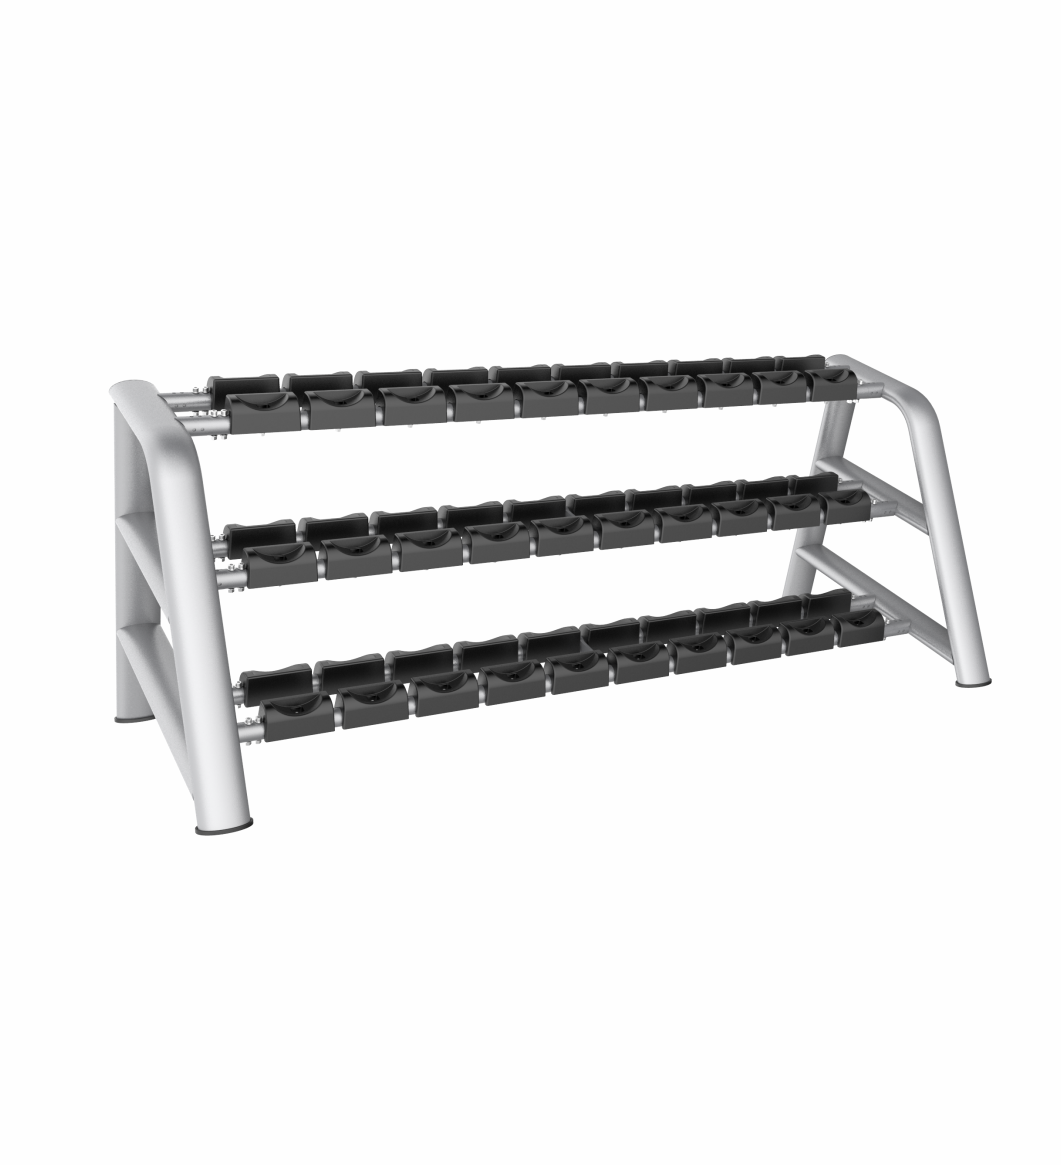 3 LAYERS DUMBELL RACK